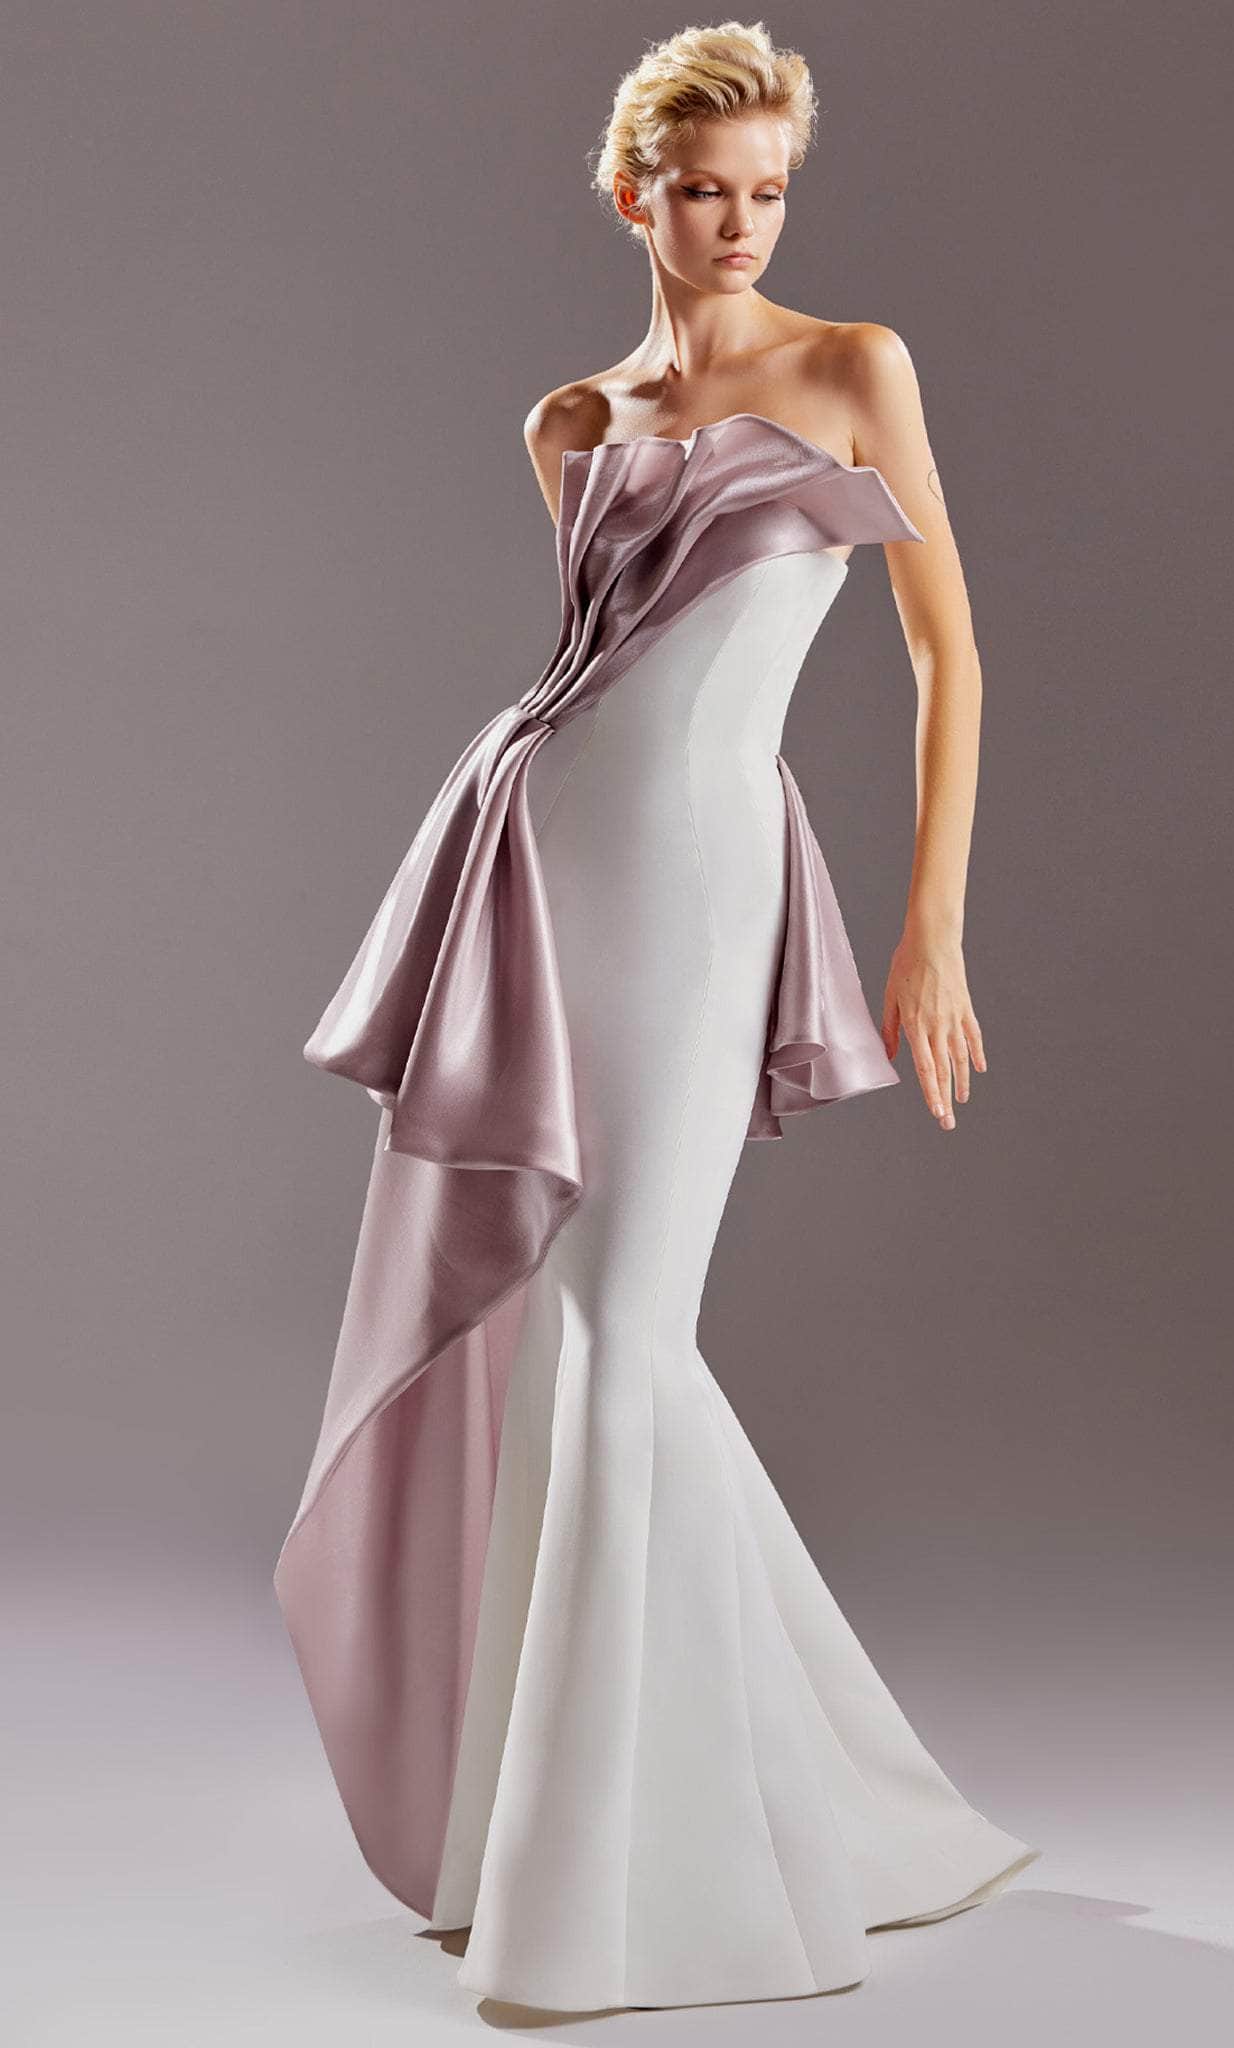 Image of MNM Couture G1517 - Strapless Ruffled Evening Dress